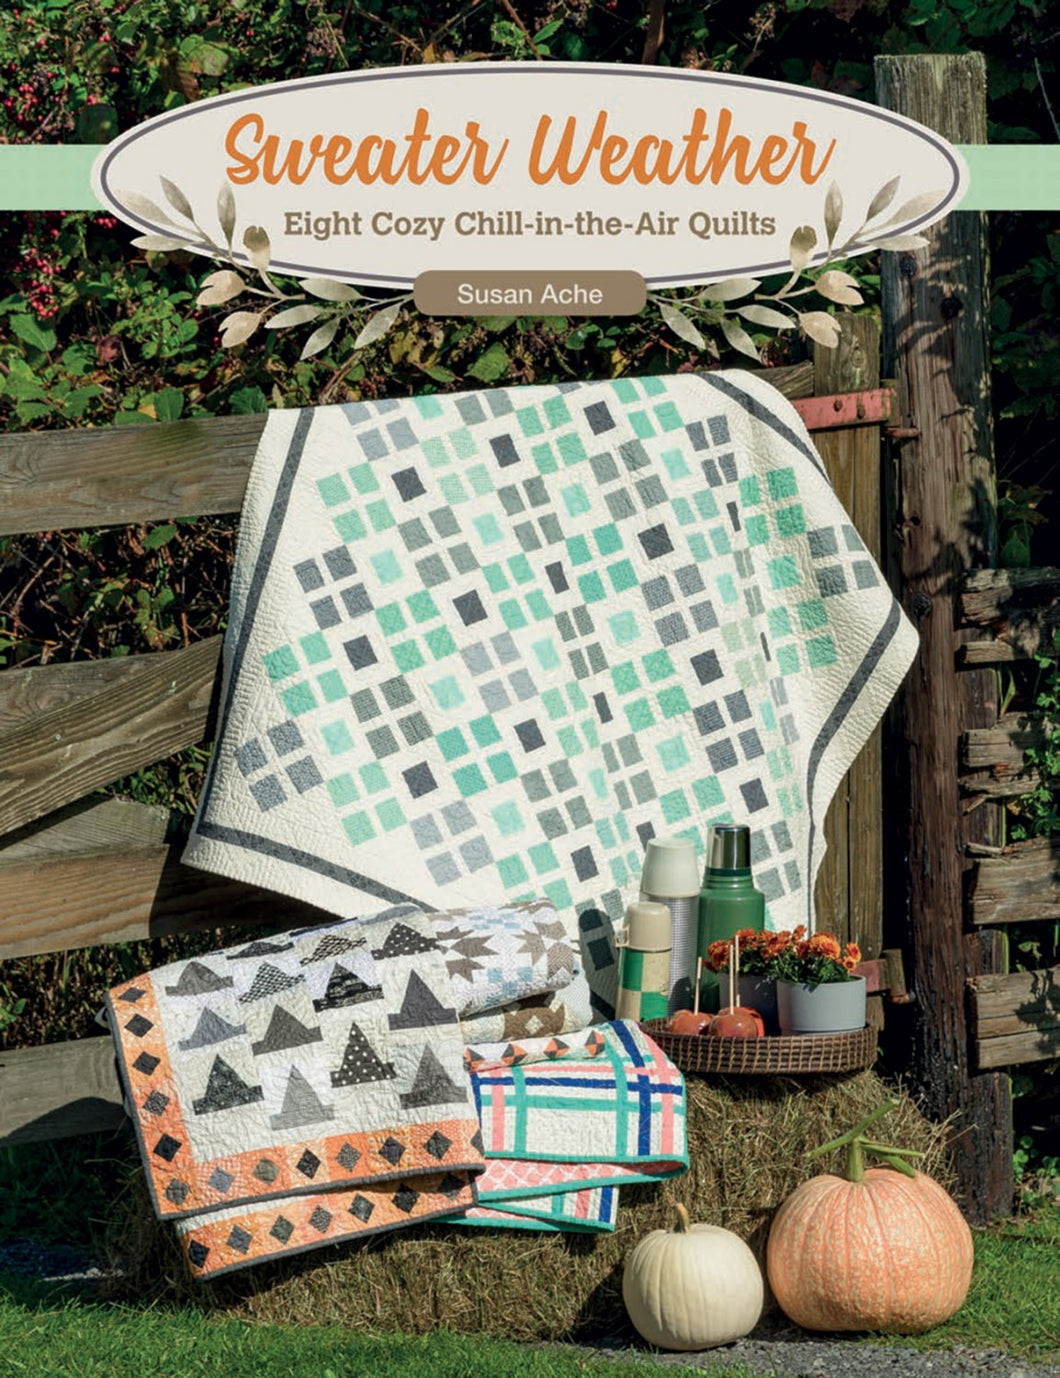 Sweater Weather: Eight Cozy Chill-in-the-Air Quilts by Susan Ache